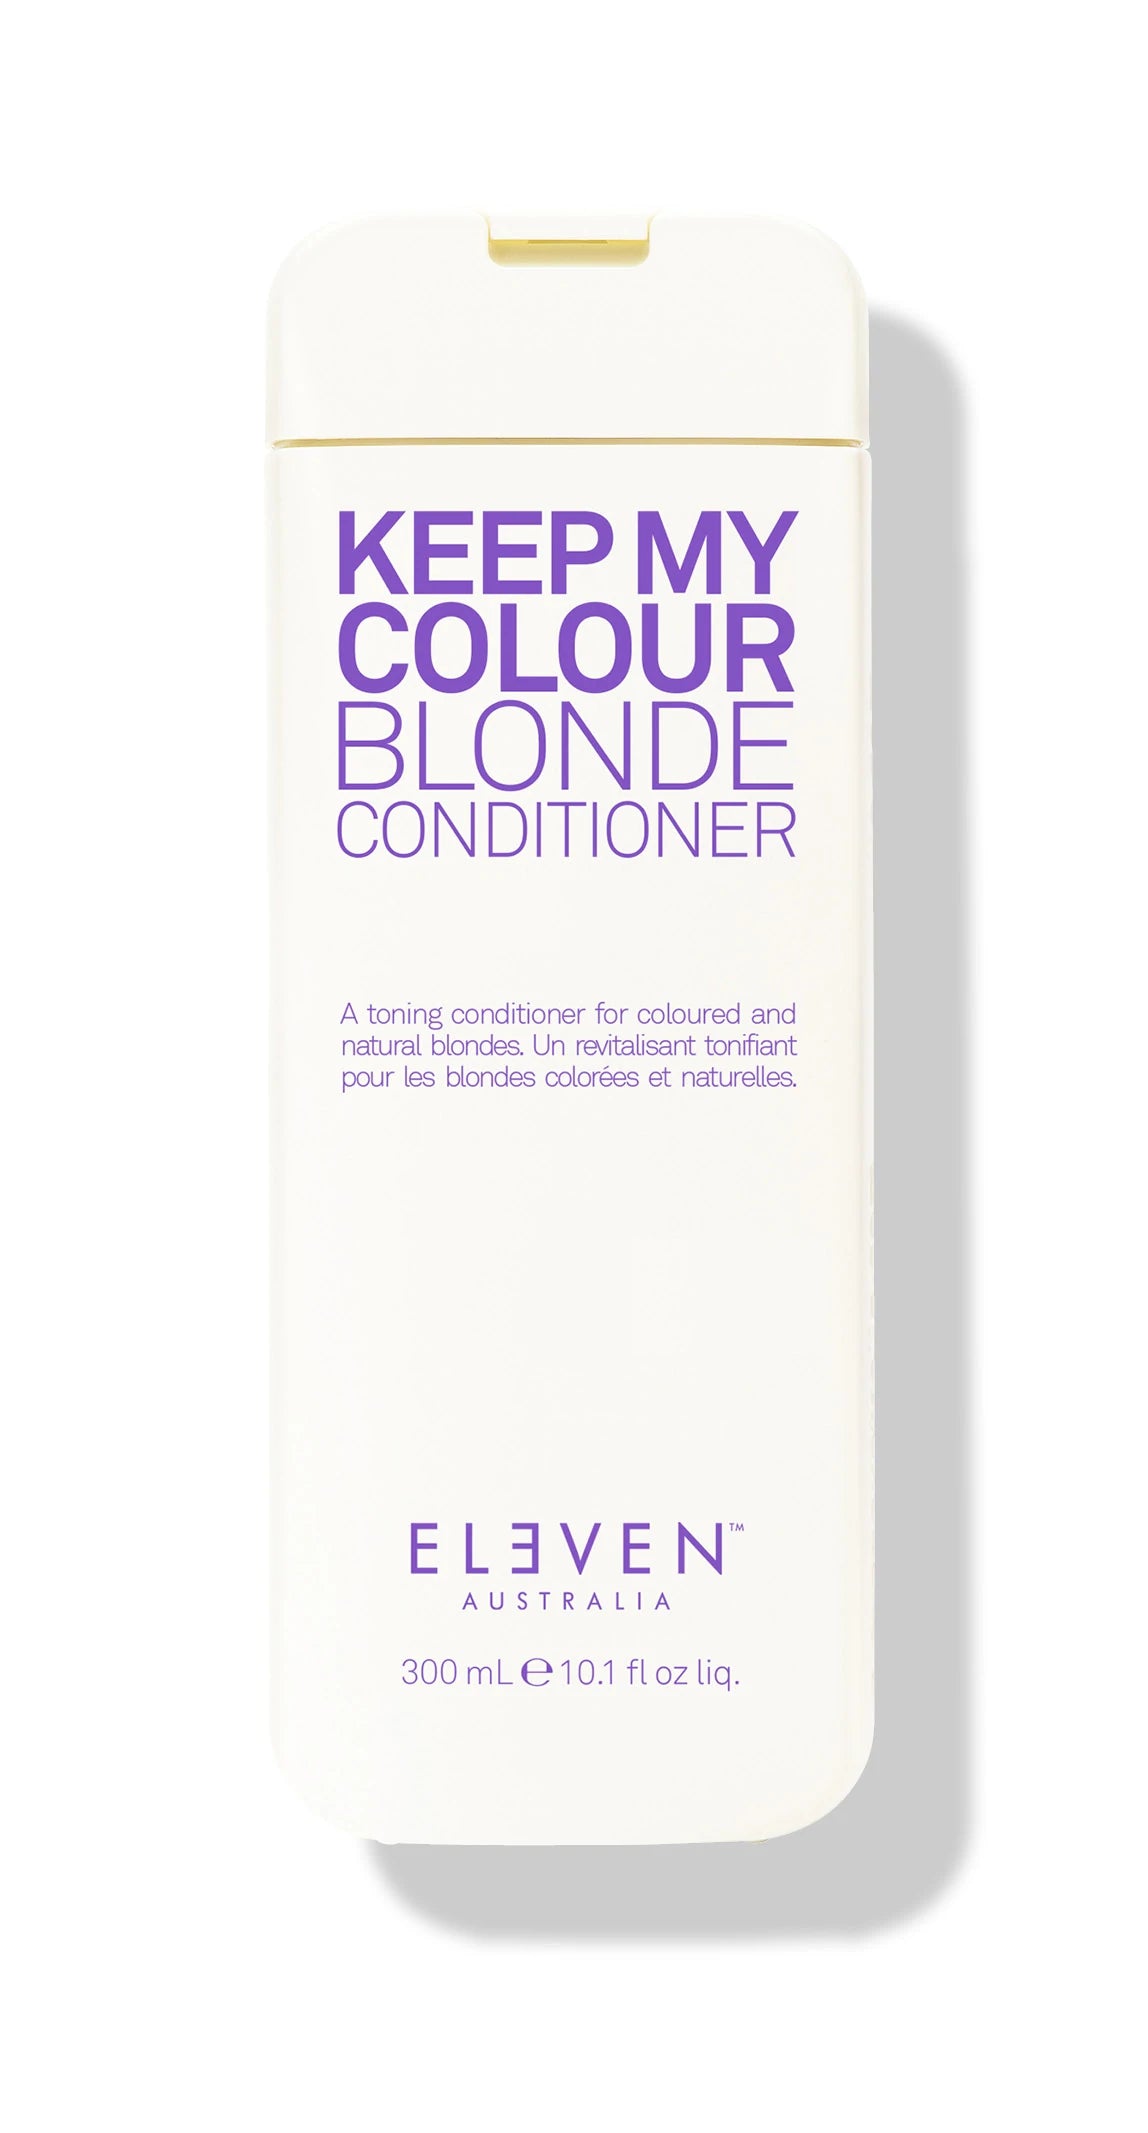 EA KEEP MY COLOUR BLONDE CONDITIONER 300ML